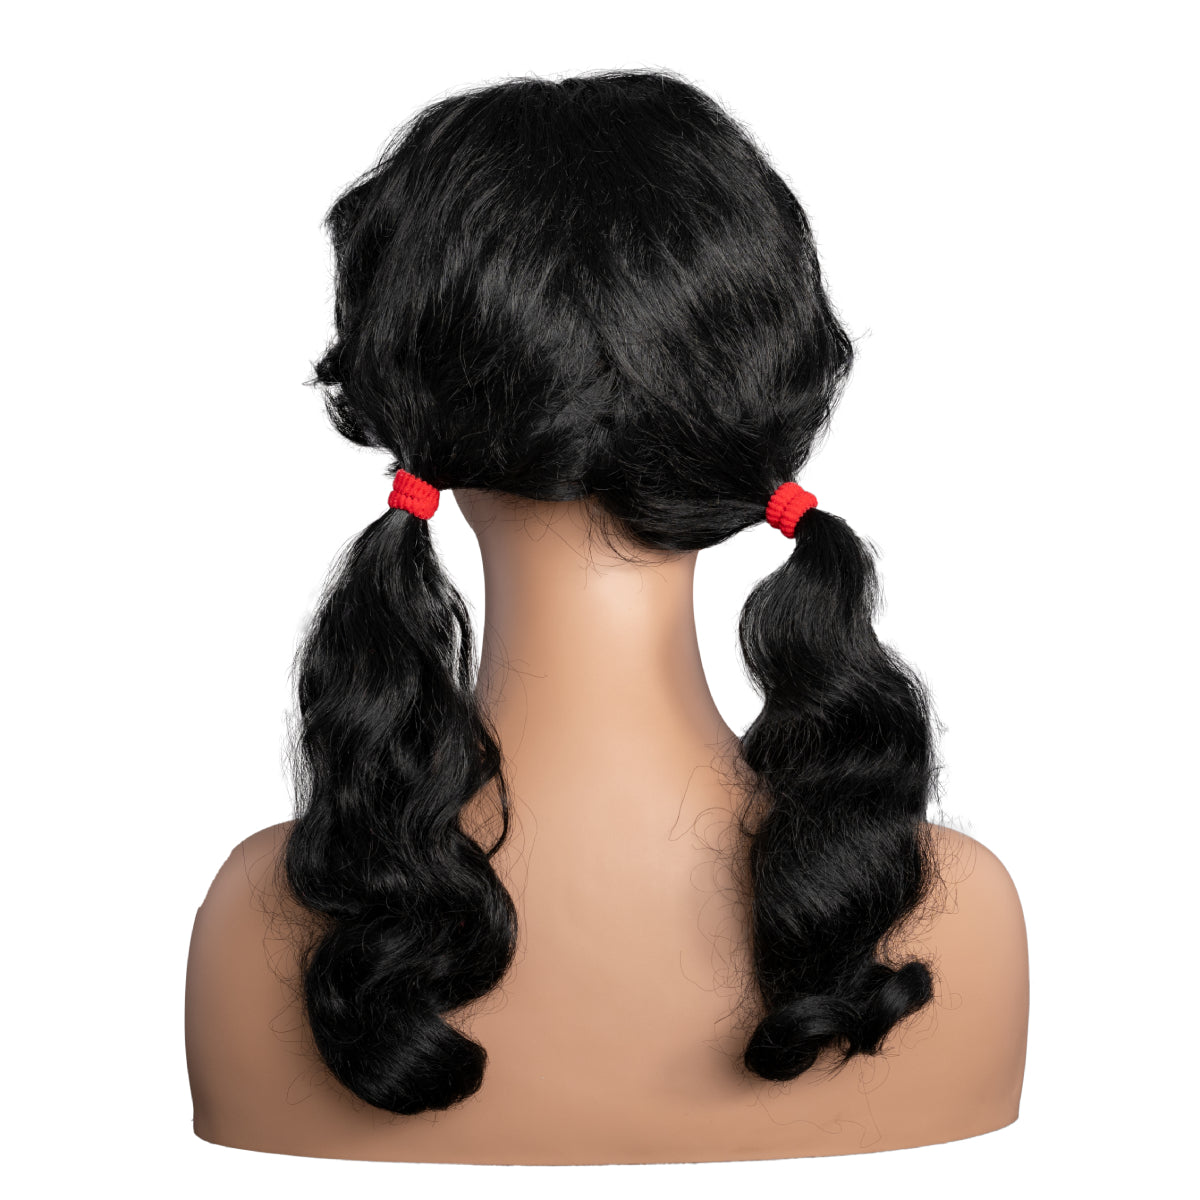 Penny Proud Cartoon Character Wig Back View